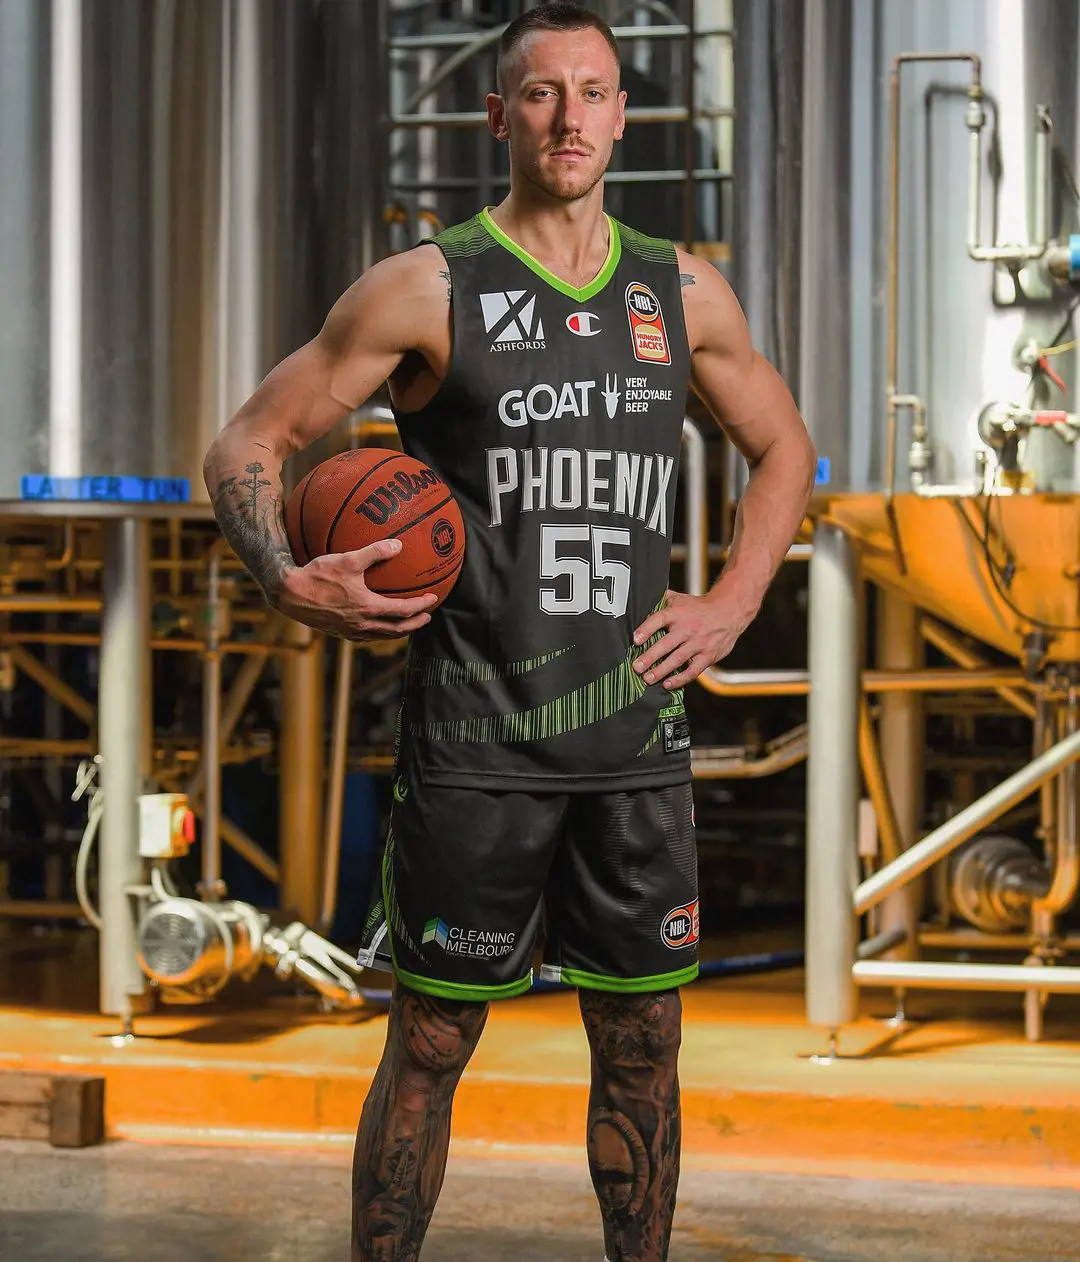 Mitch earned All-NBL Second Team honors with 36ers in his final season.